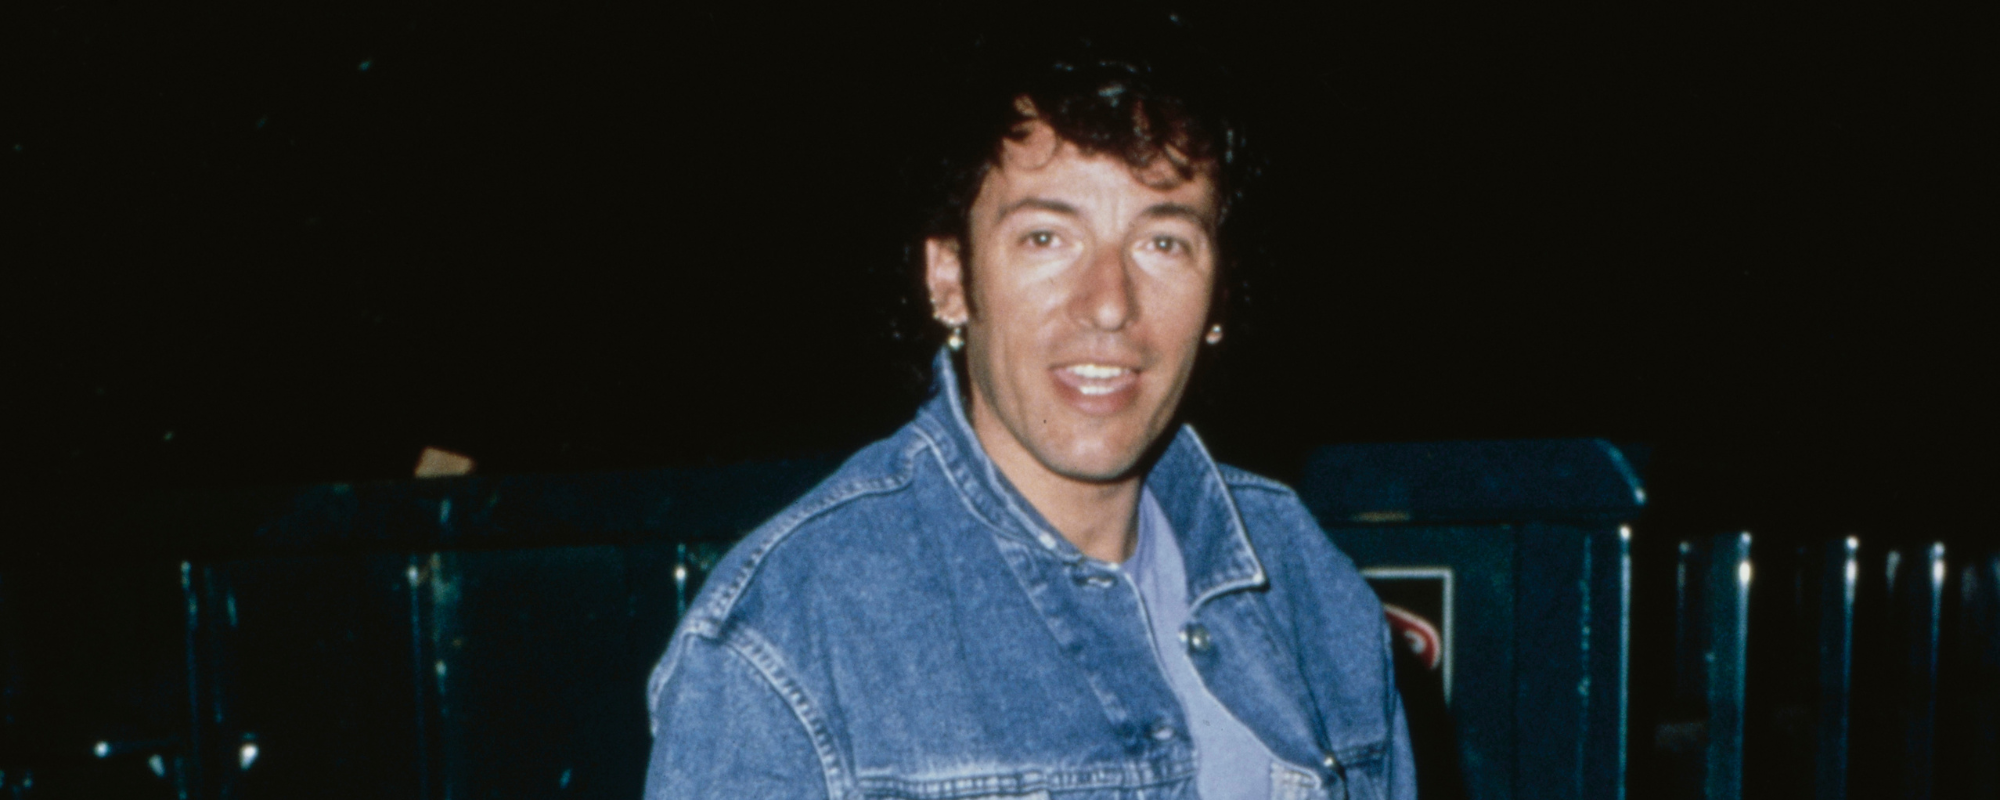 It Was Written for a Disco Diva Before the Boss Kept It for Himself: The Meaning Behind “Cover Me” by Bruce Springsteen